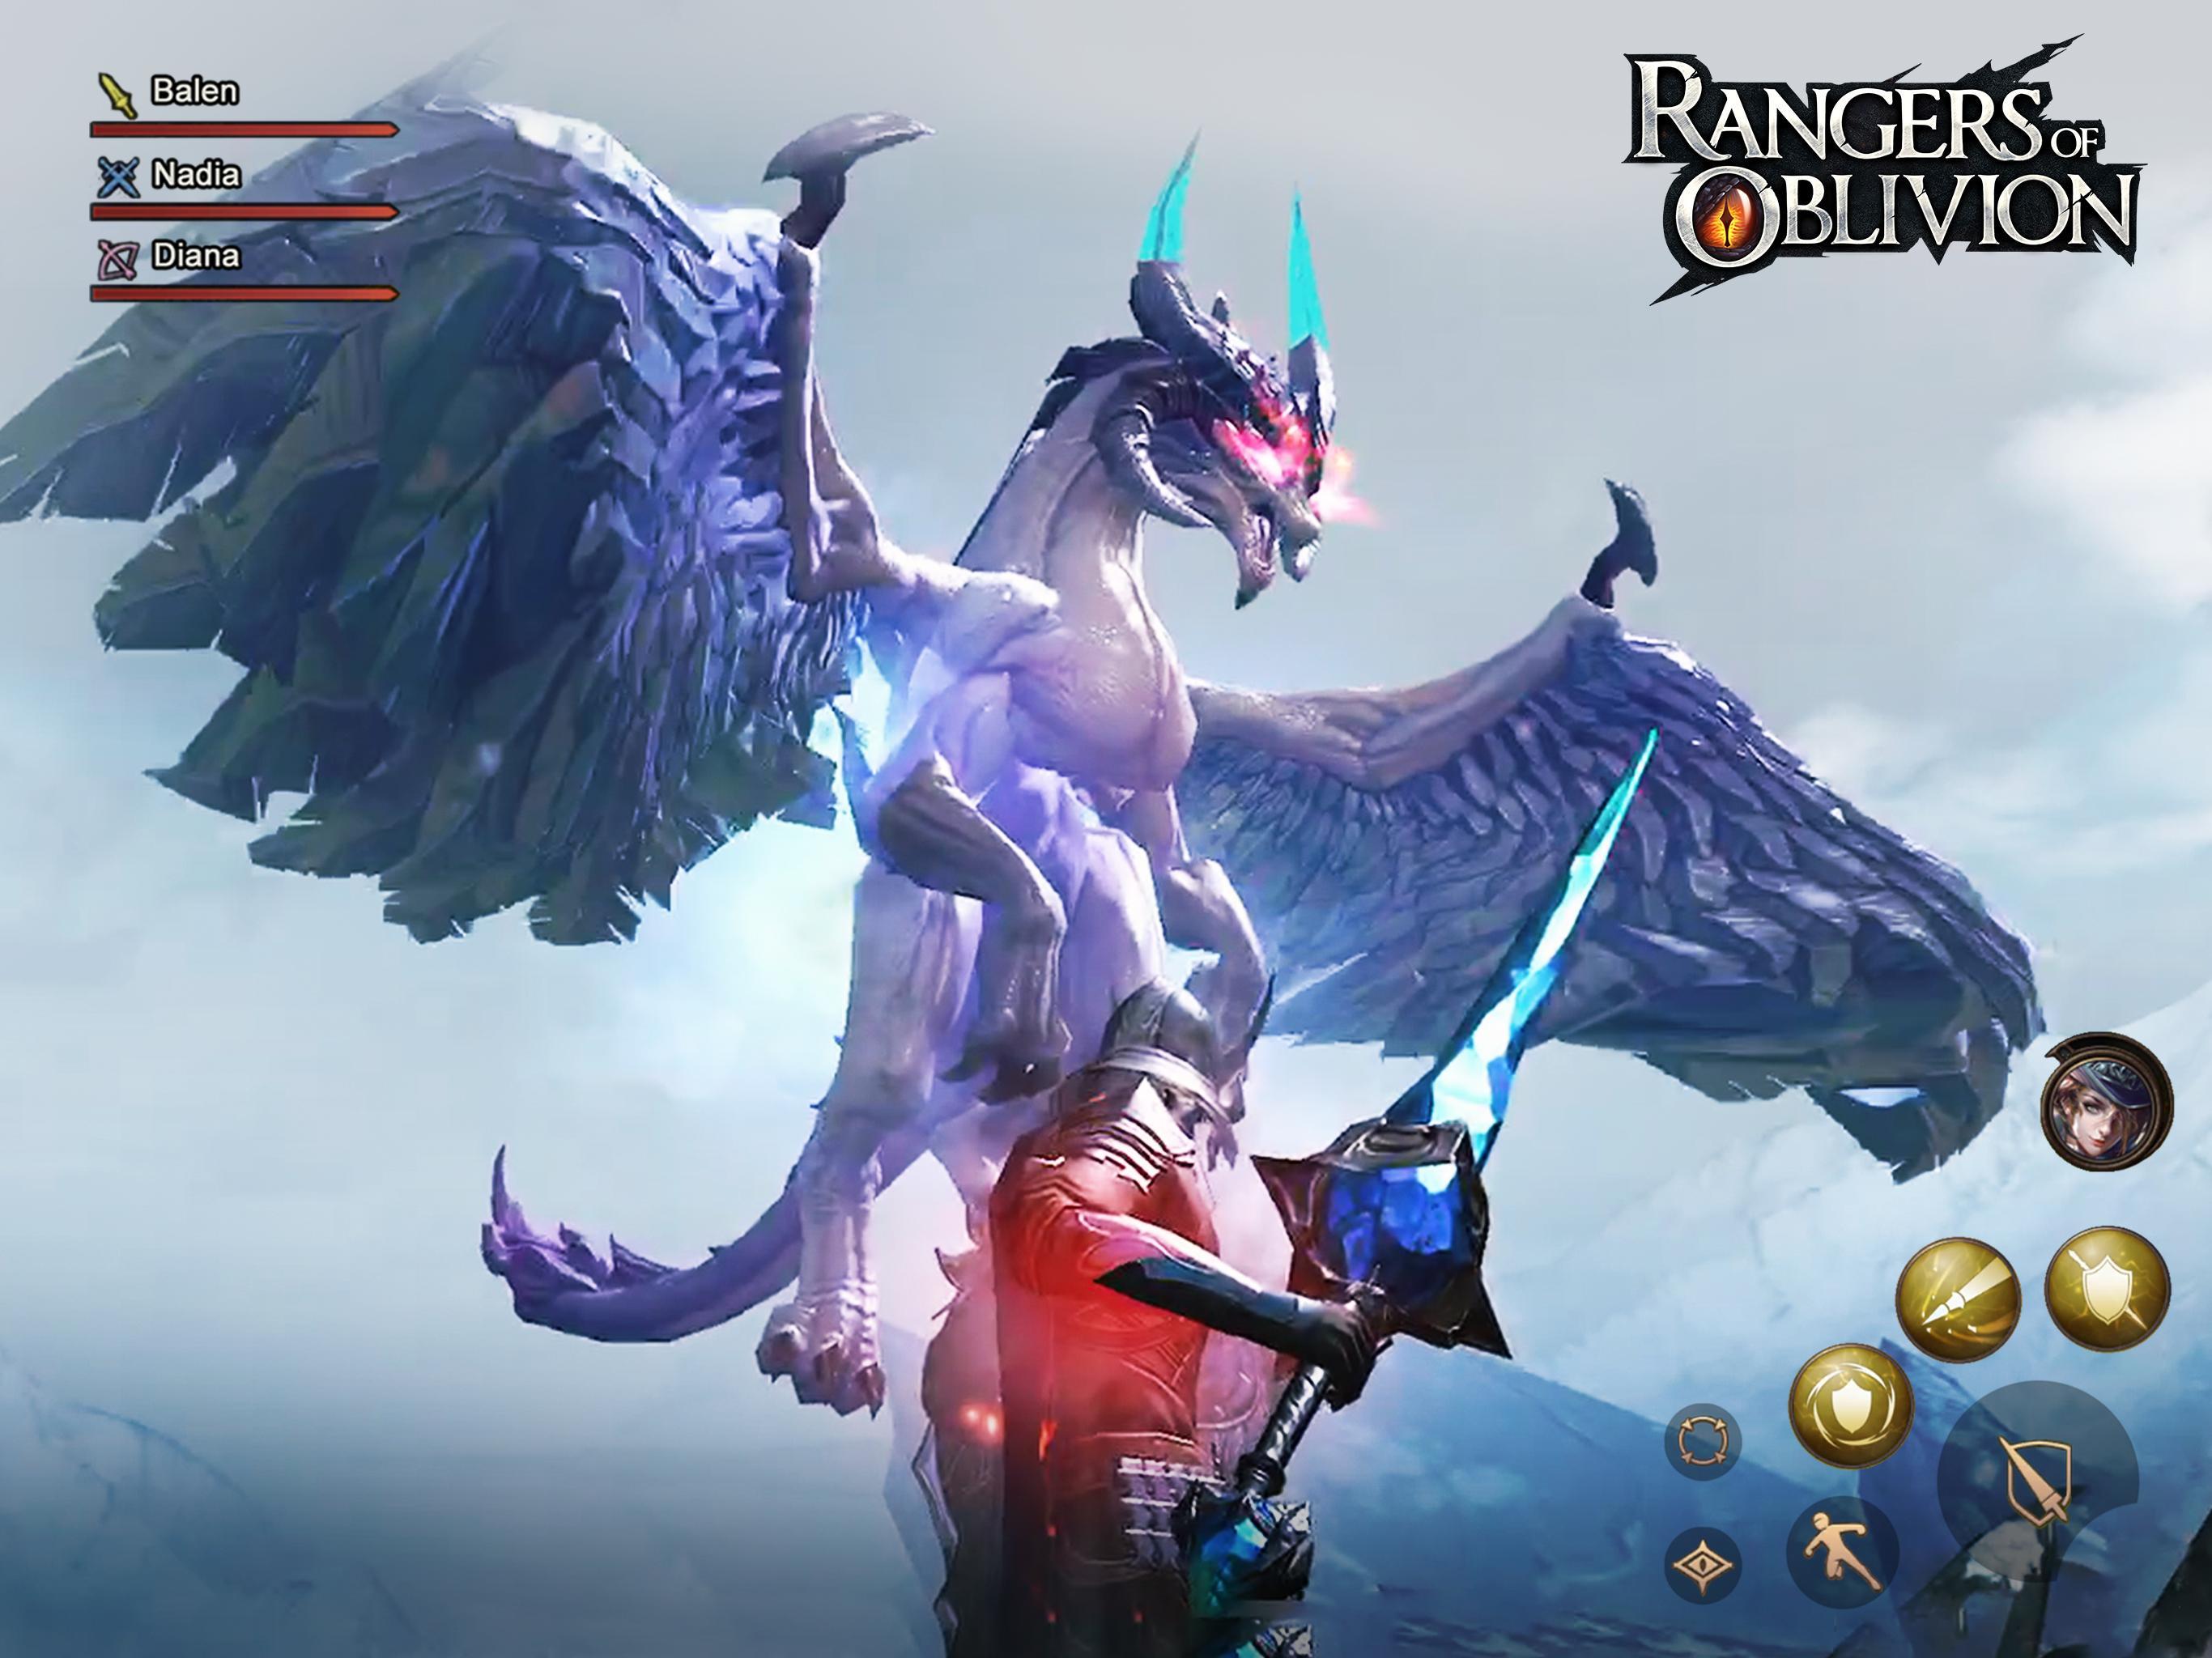 Rangers of Oblivion for Android - APK Download